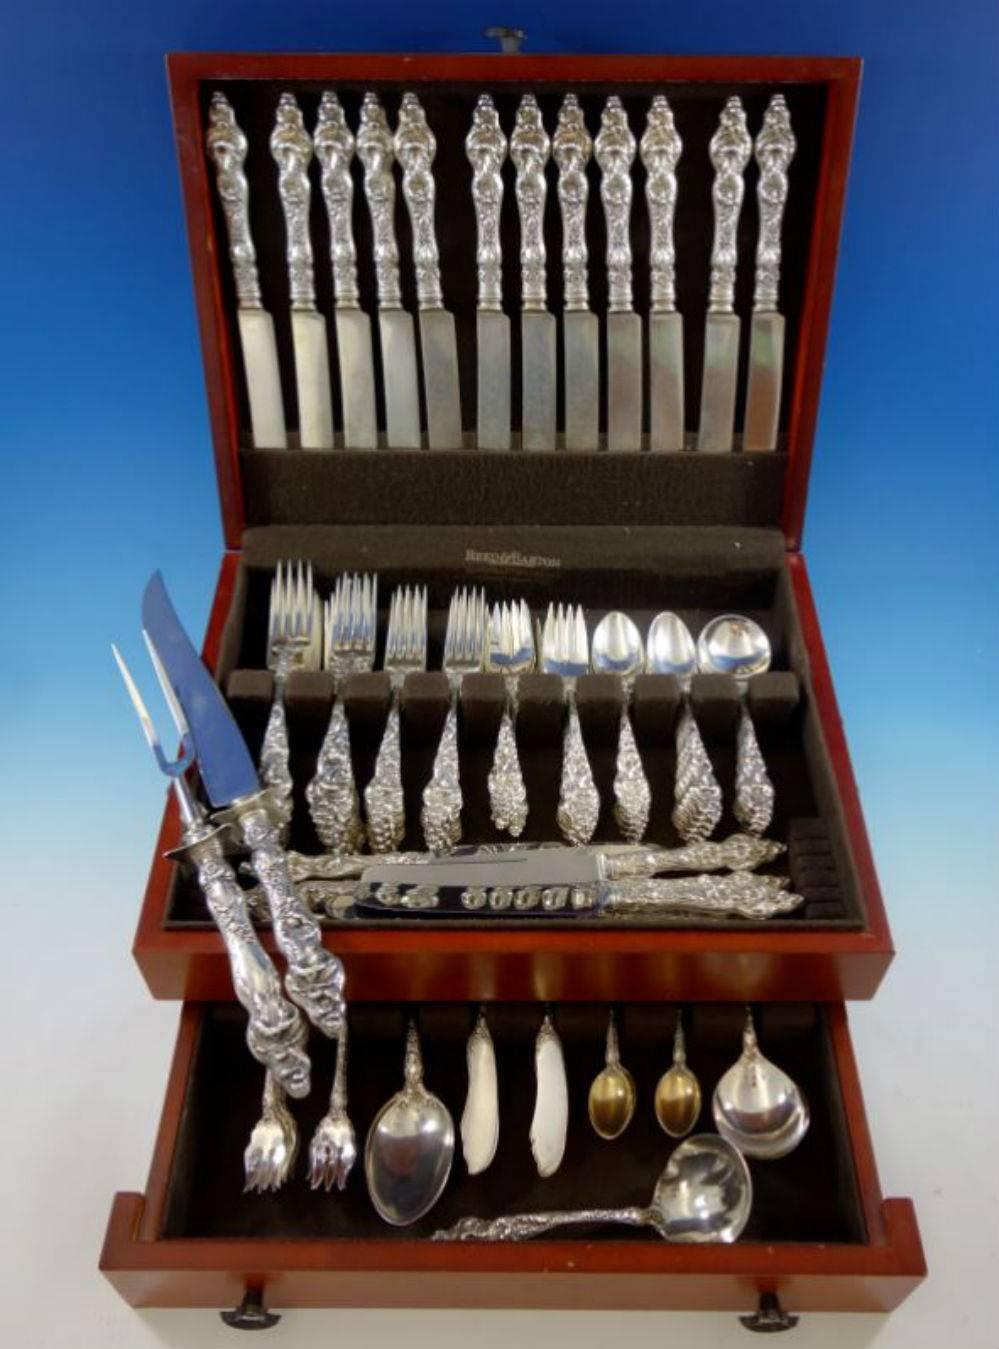 Les six Fleurs by Reed & Barton sterling silver dinner and luncheon size flatware set, 125 pieces. This set includes: 

12 large banquet size knives, 10 1/2